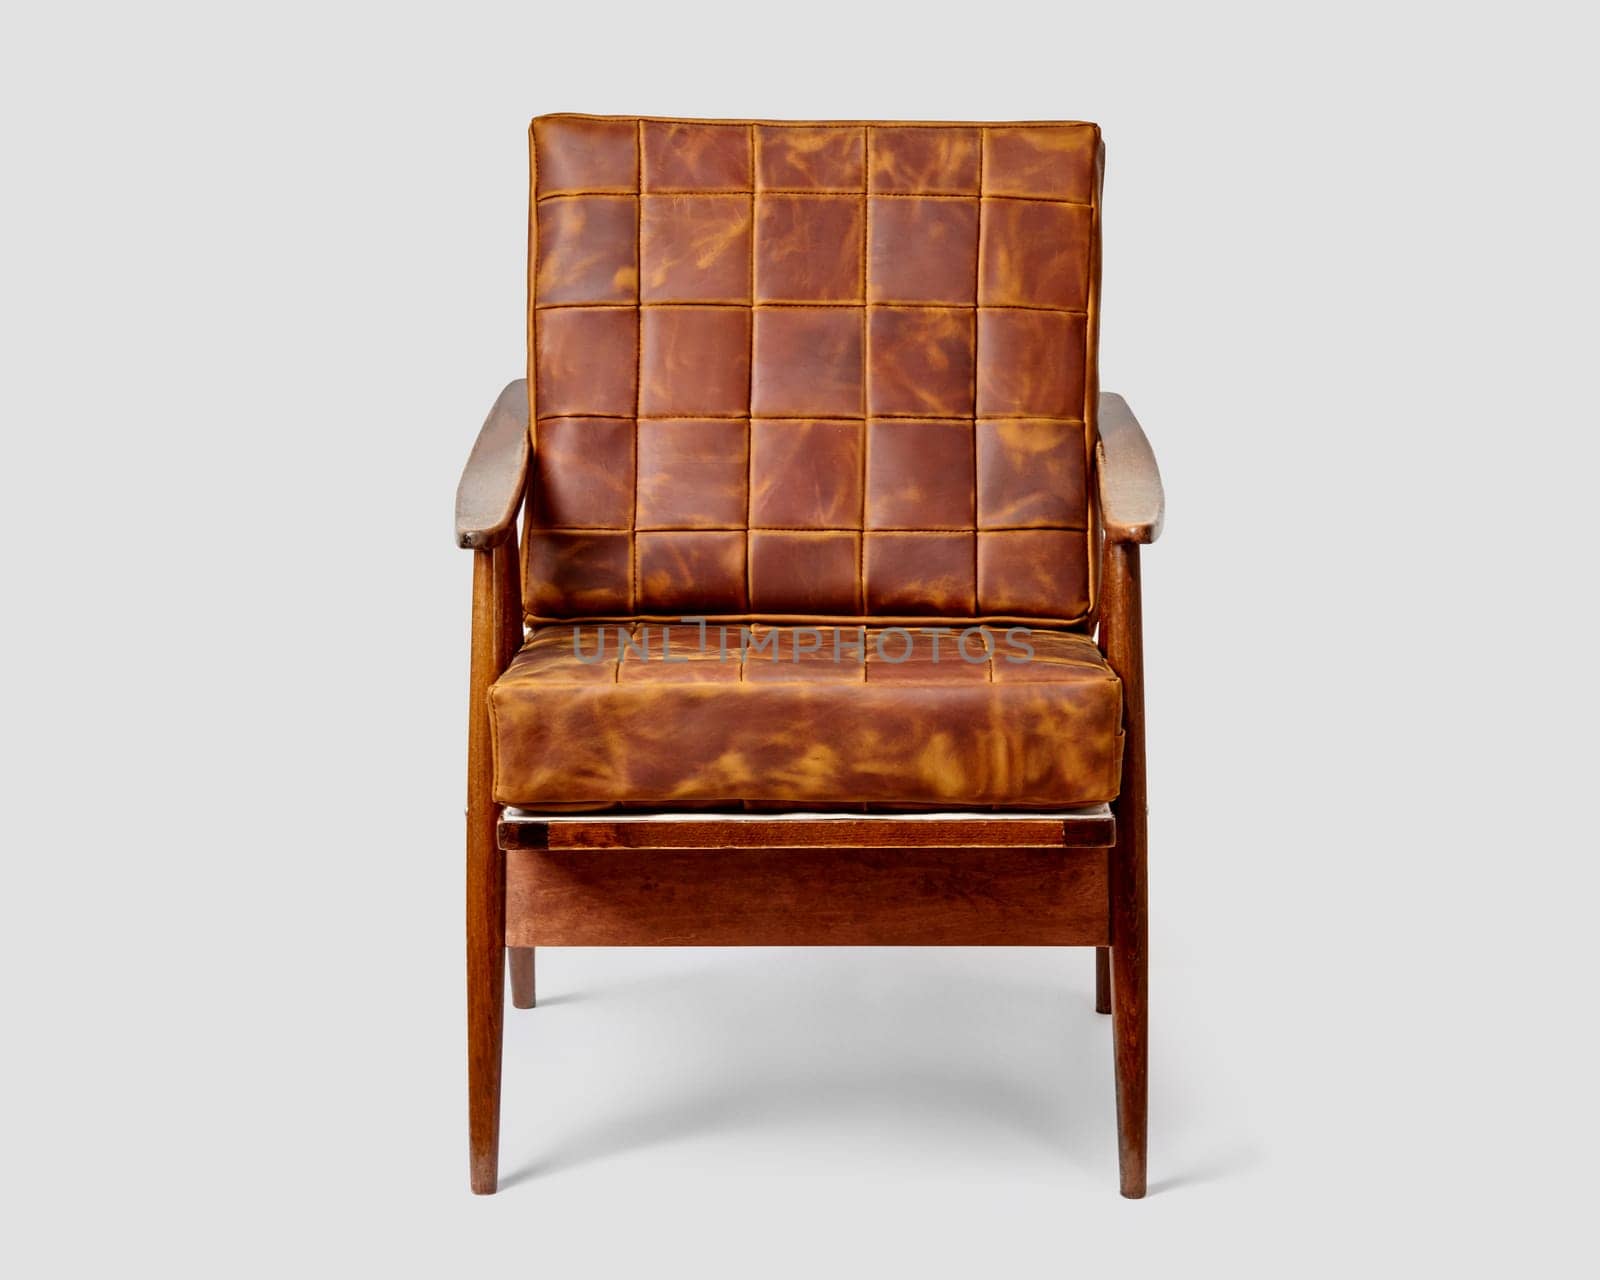 Vintage-inspired wooden chair with brown patchwork leather upholstery and distinctive armrests, against light backdrop. Stylish piece of furniture for cozy interior